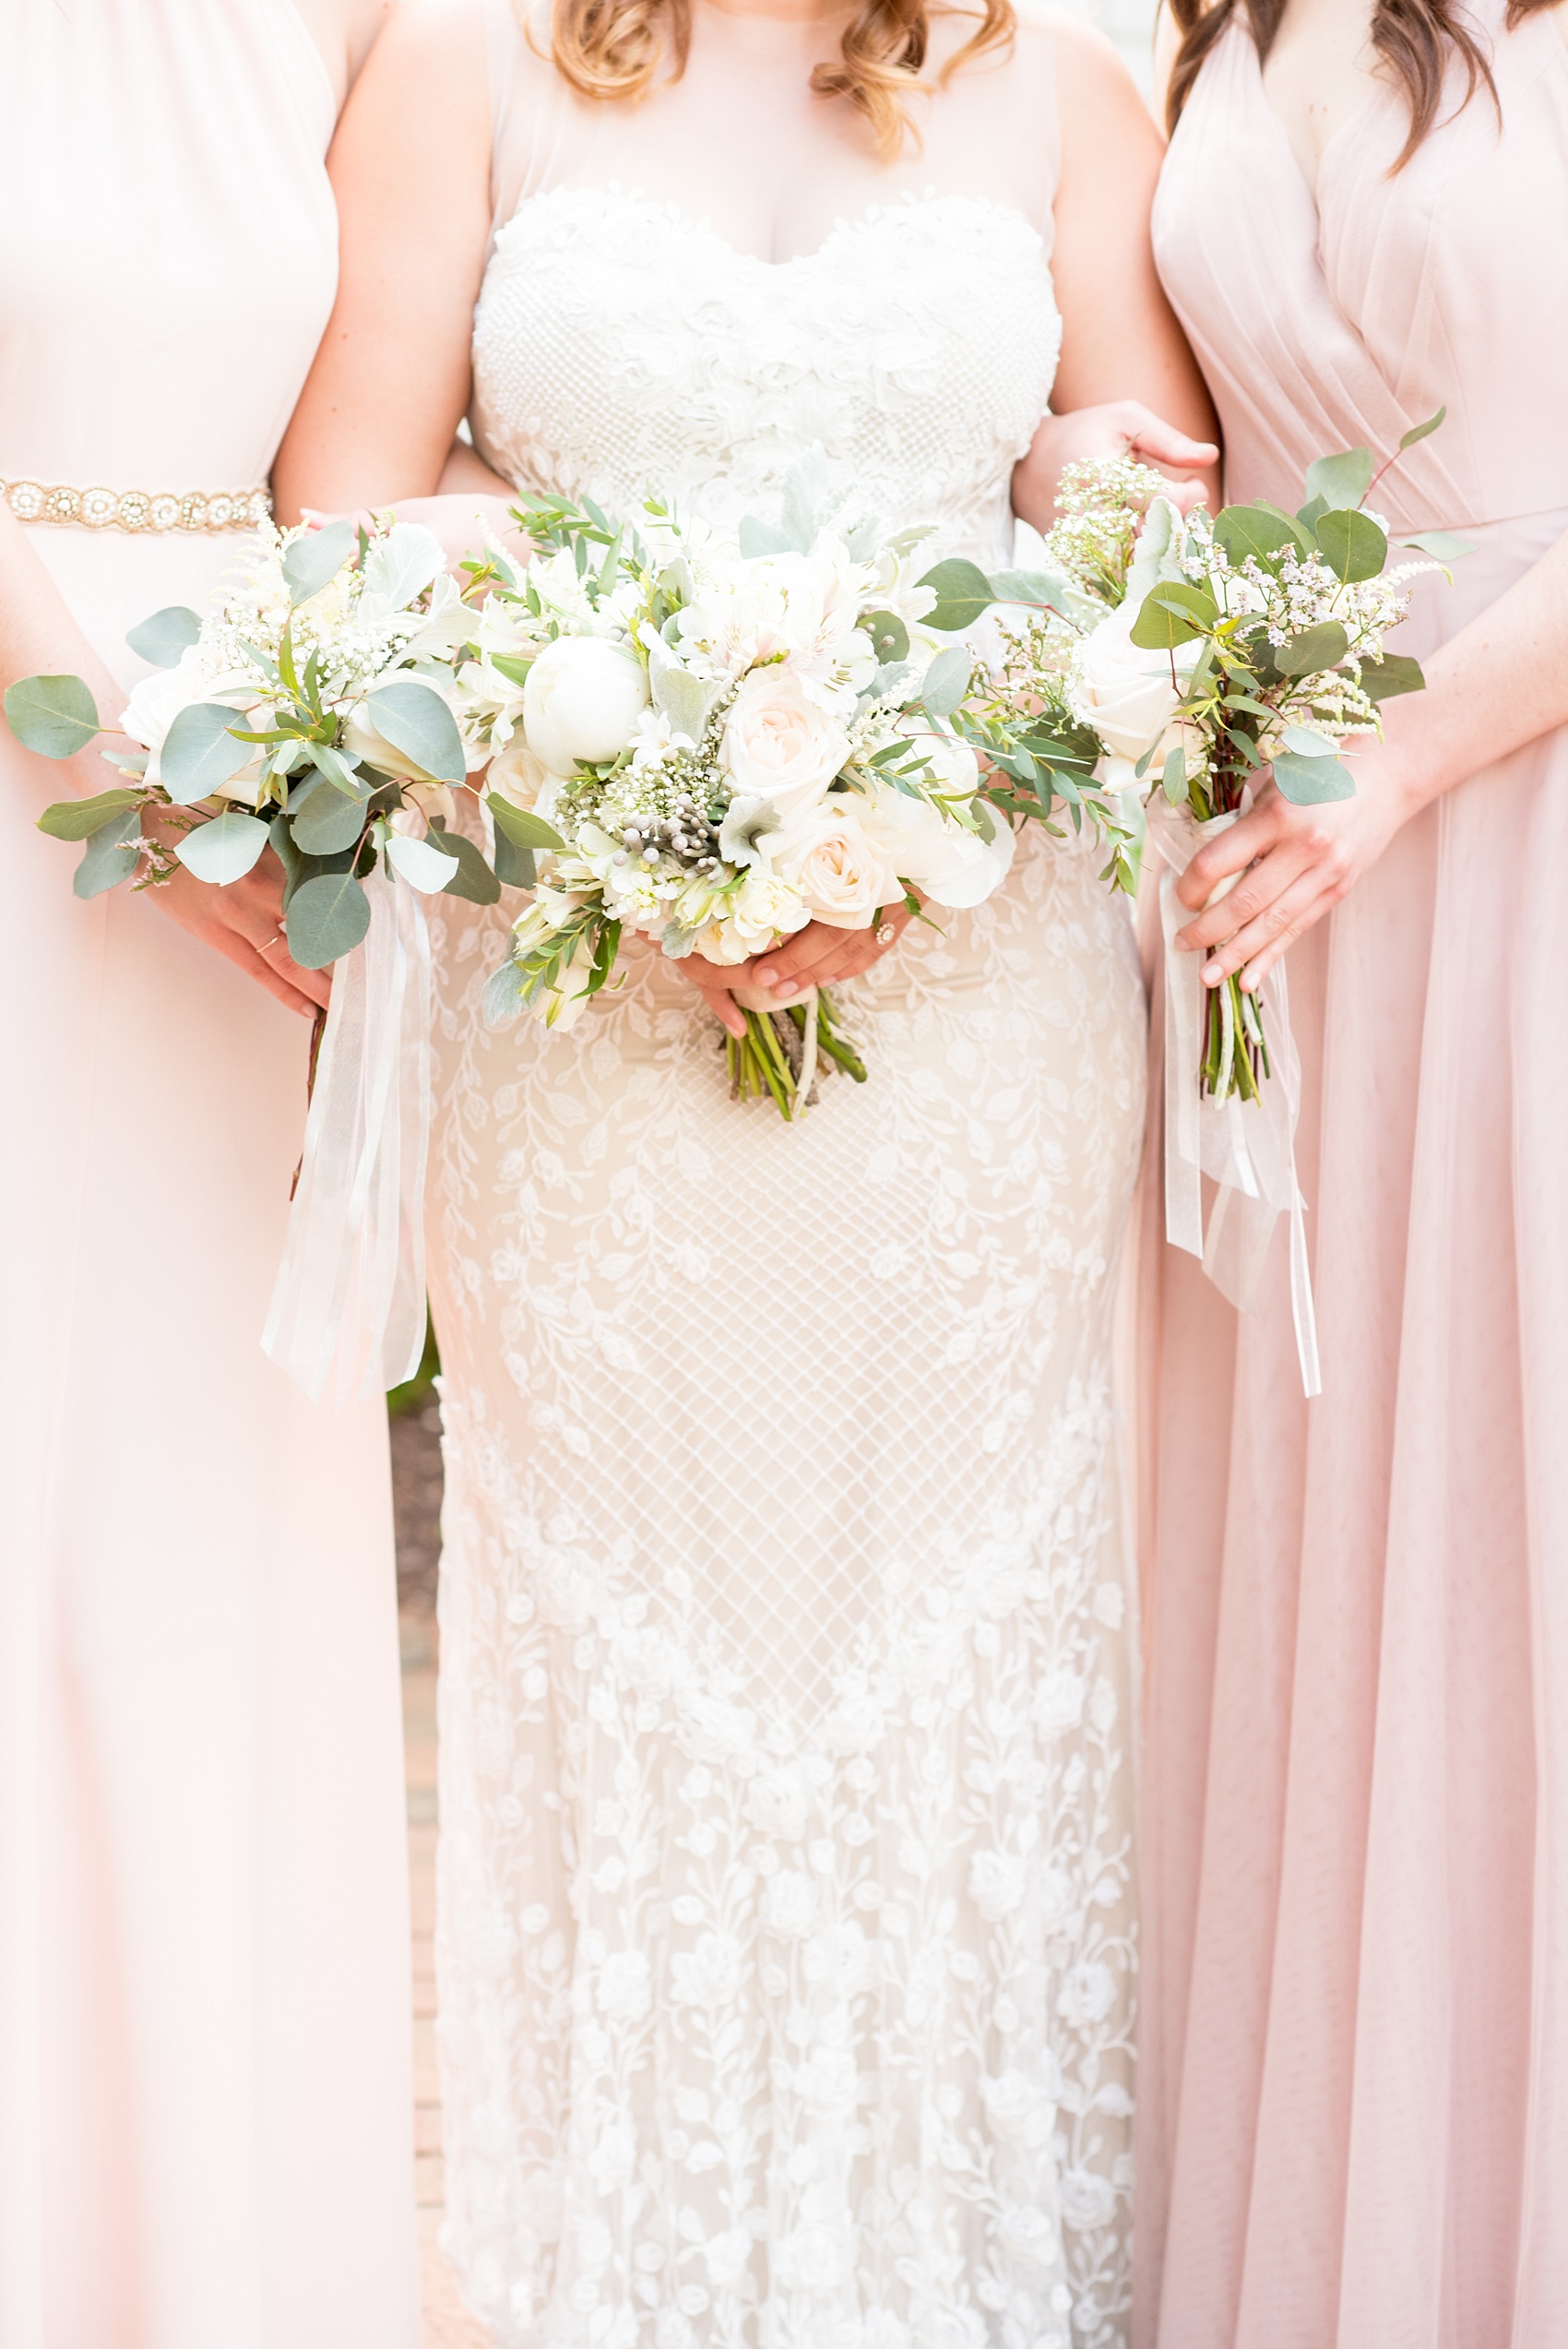 Mikkel Paige Photography photo of a wedding at Madison Hotel in NJ with the bridal party in light pink mismatched dresses with white rose and eucalyptus bouquets with long ribbons and the bride in a beaded BHLDN gown.